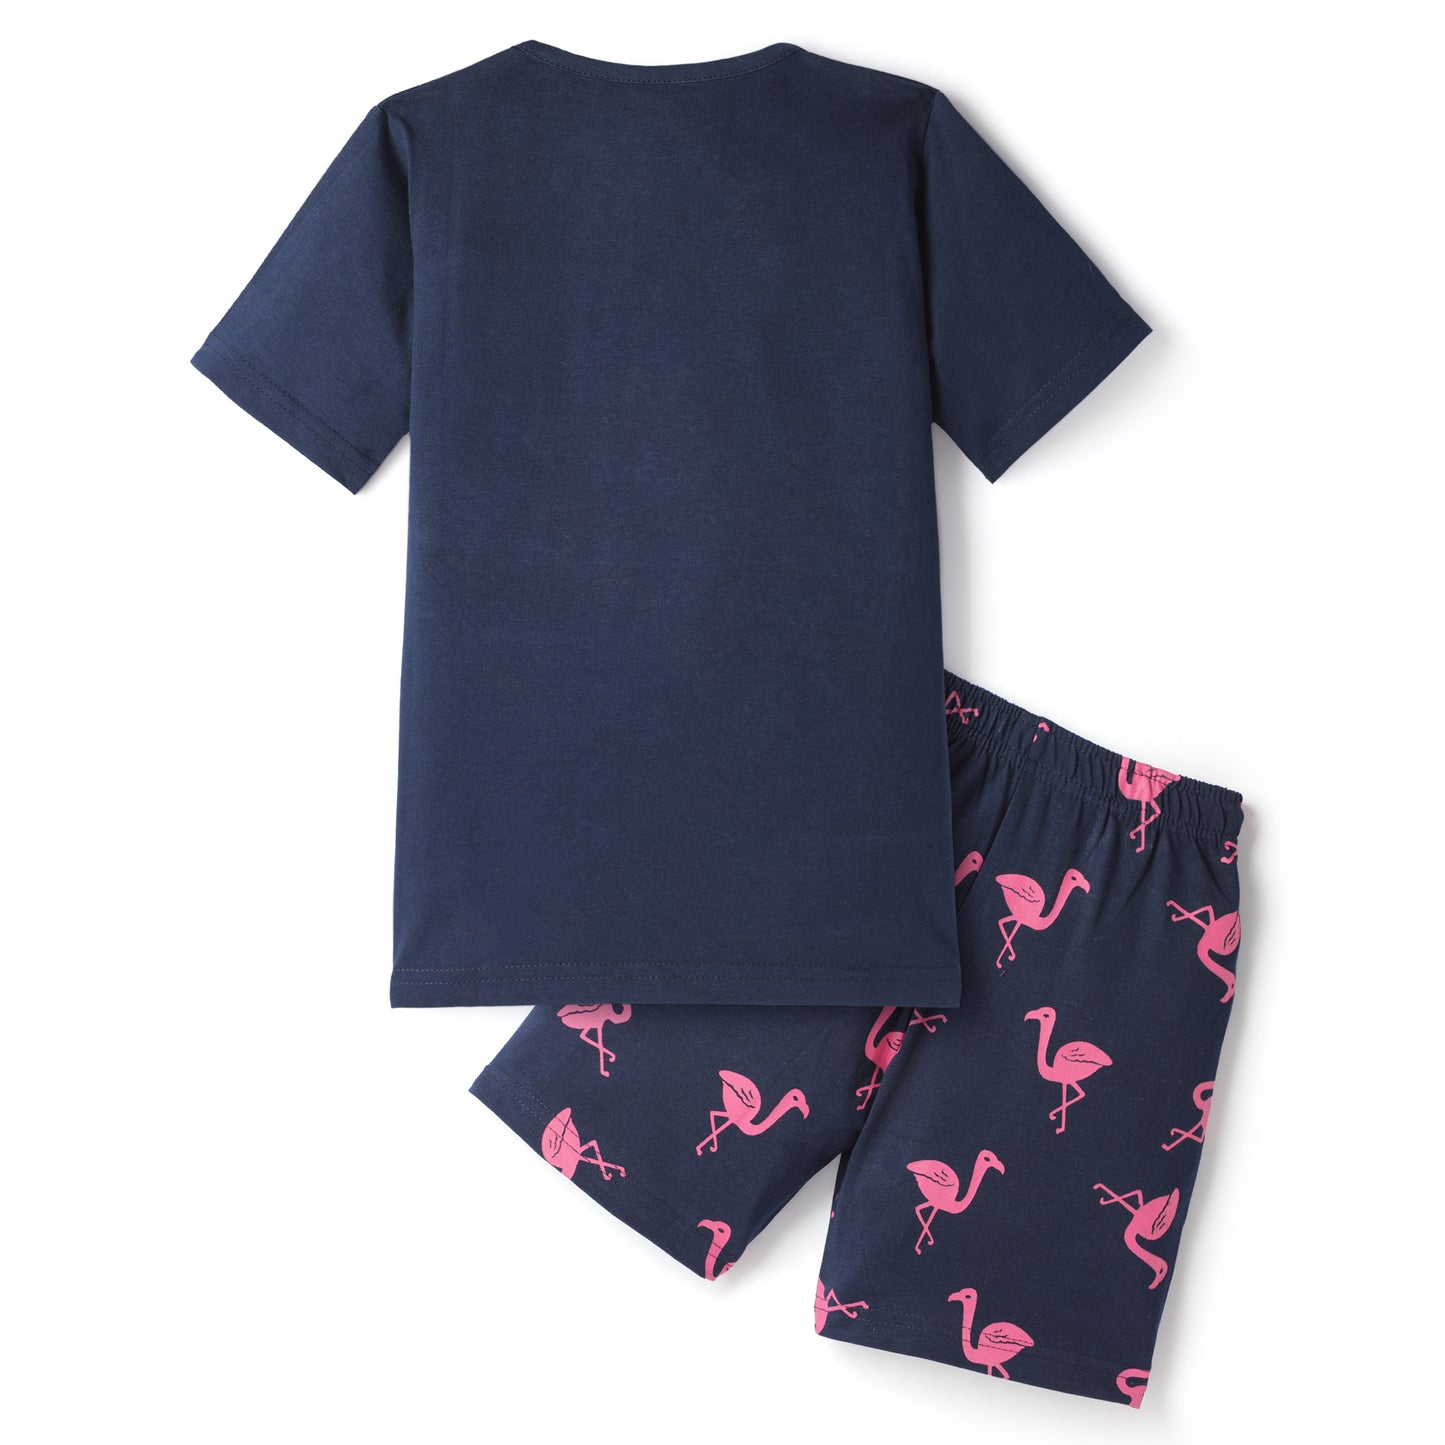 Navy Blue & Grey Pure Cotton Half Sleeves Printed Shorts Set for Girls - Pack of 2